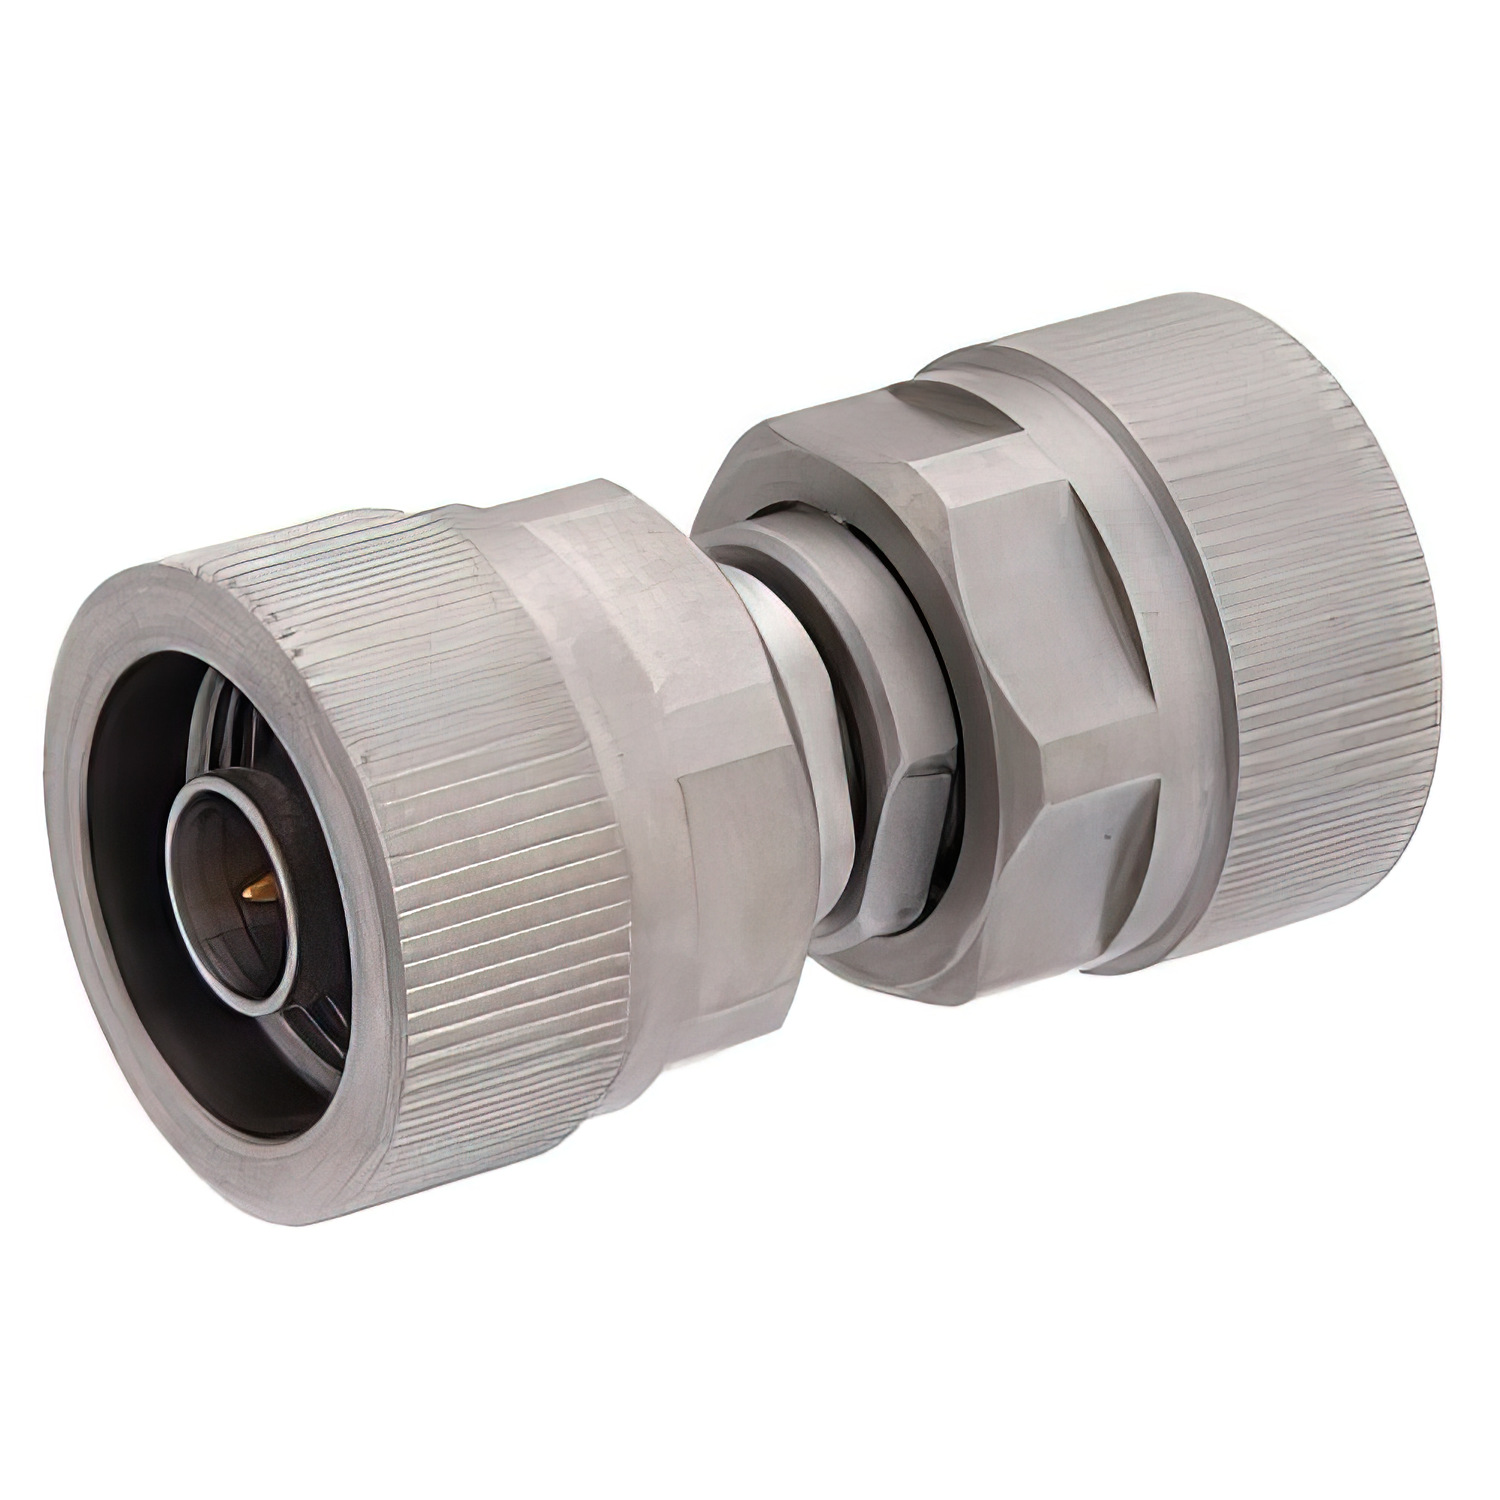 Precision N Male to 7mm Sexless Adapter1